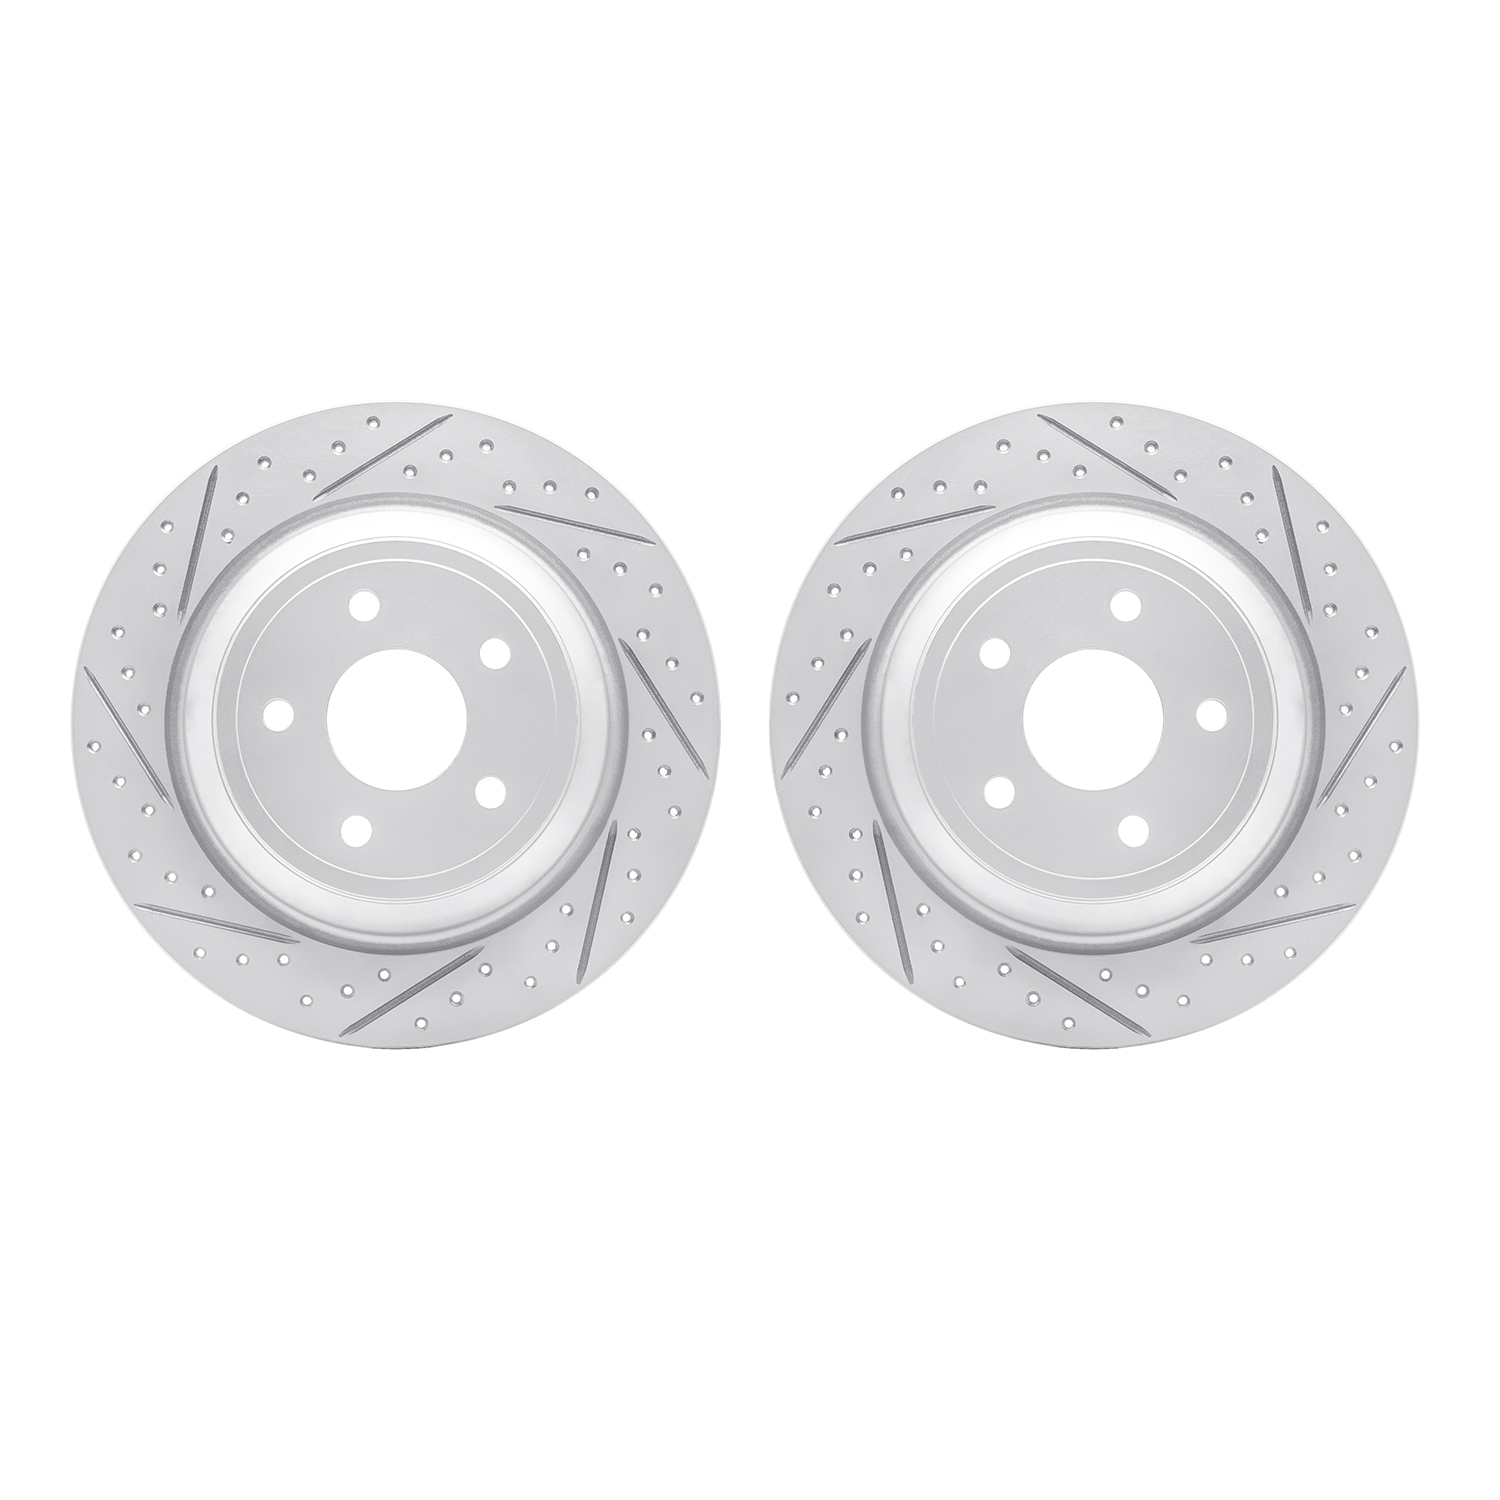 2002-54161 Geoperformance Drilled/Slotted Brake Rotors, Fits Select Ford/Lincoln/Mercury/Mazda, Position: Rear